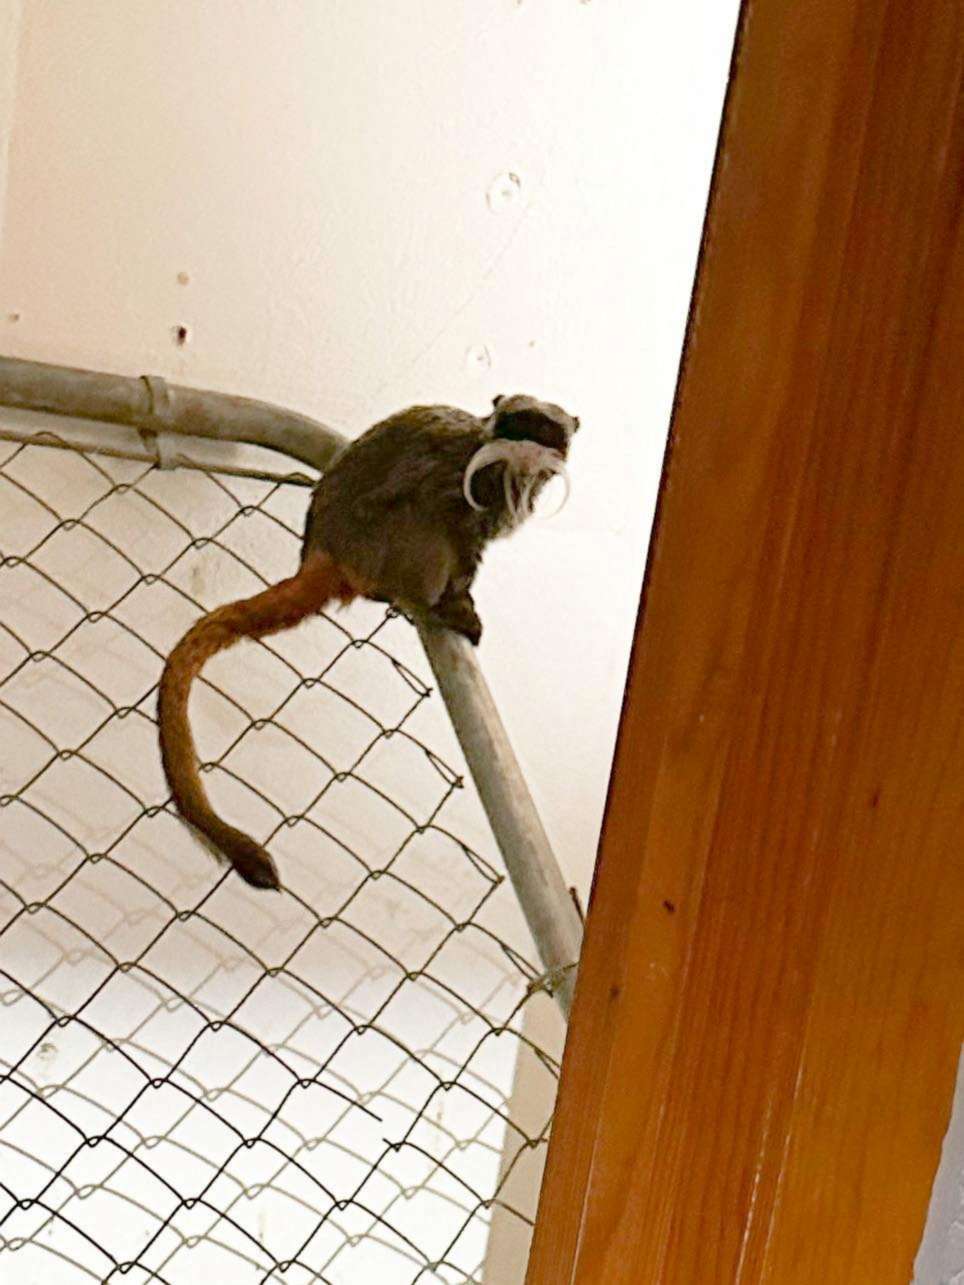 PHOTO: An emperor tamarin monkey, one of two that were discovered missing by Dallas Zoo on Jan. 30, 2023, is seen sitting on a railing at an abandoned home in Dallas County, Texas.